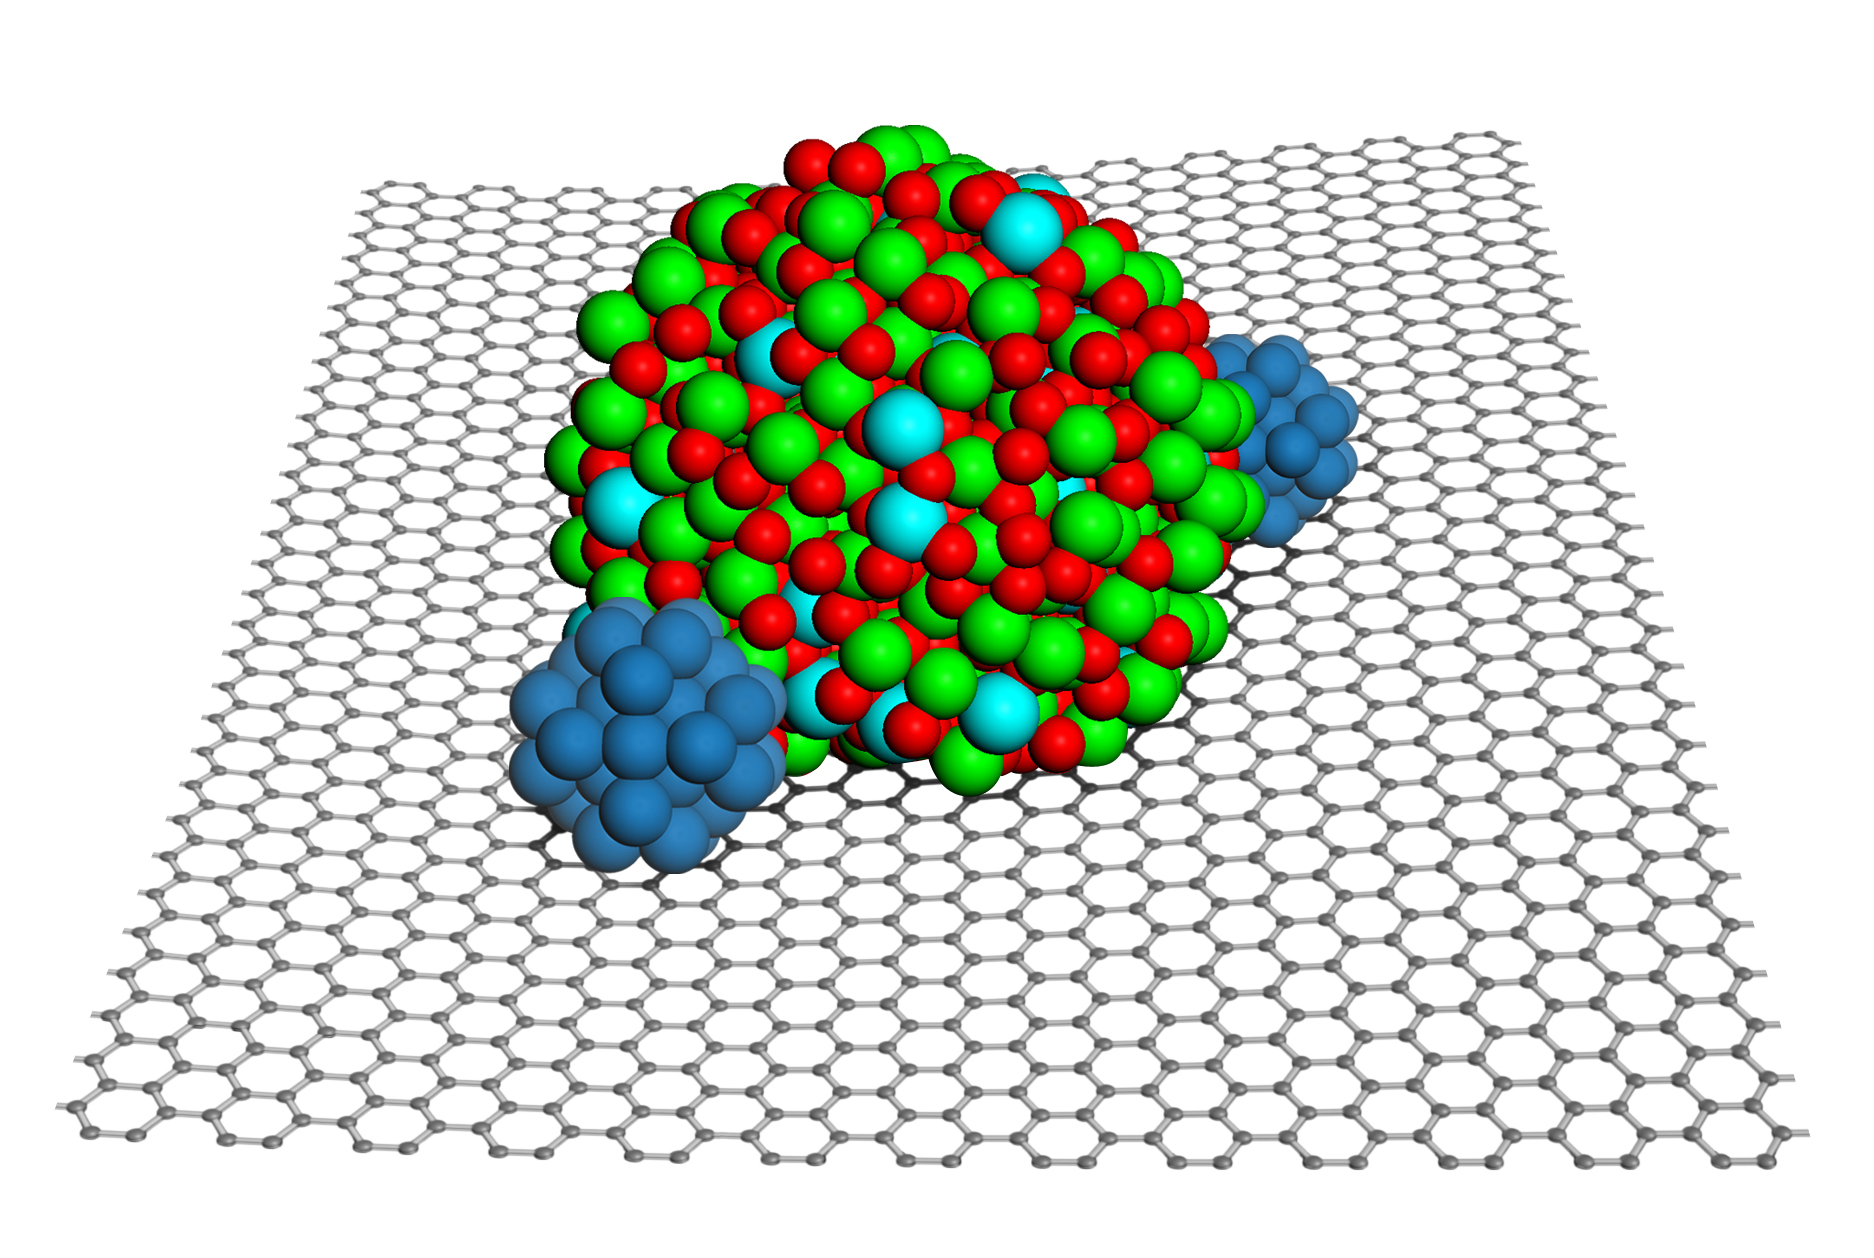 Nanoparticles of indium tin oxide (green and red) braces platinum nanoparticles (blue) on the surface of graphene (black honeycomb) to make a hardier, more chemically active fuel cell material. 